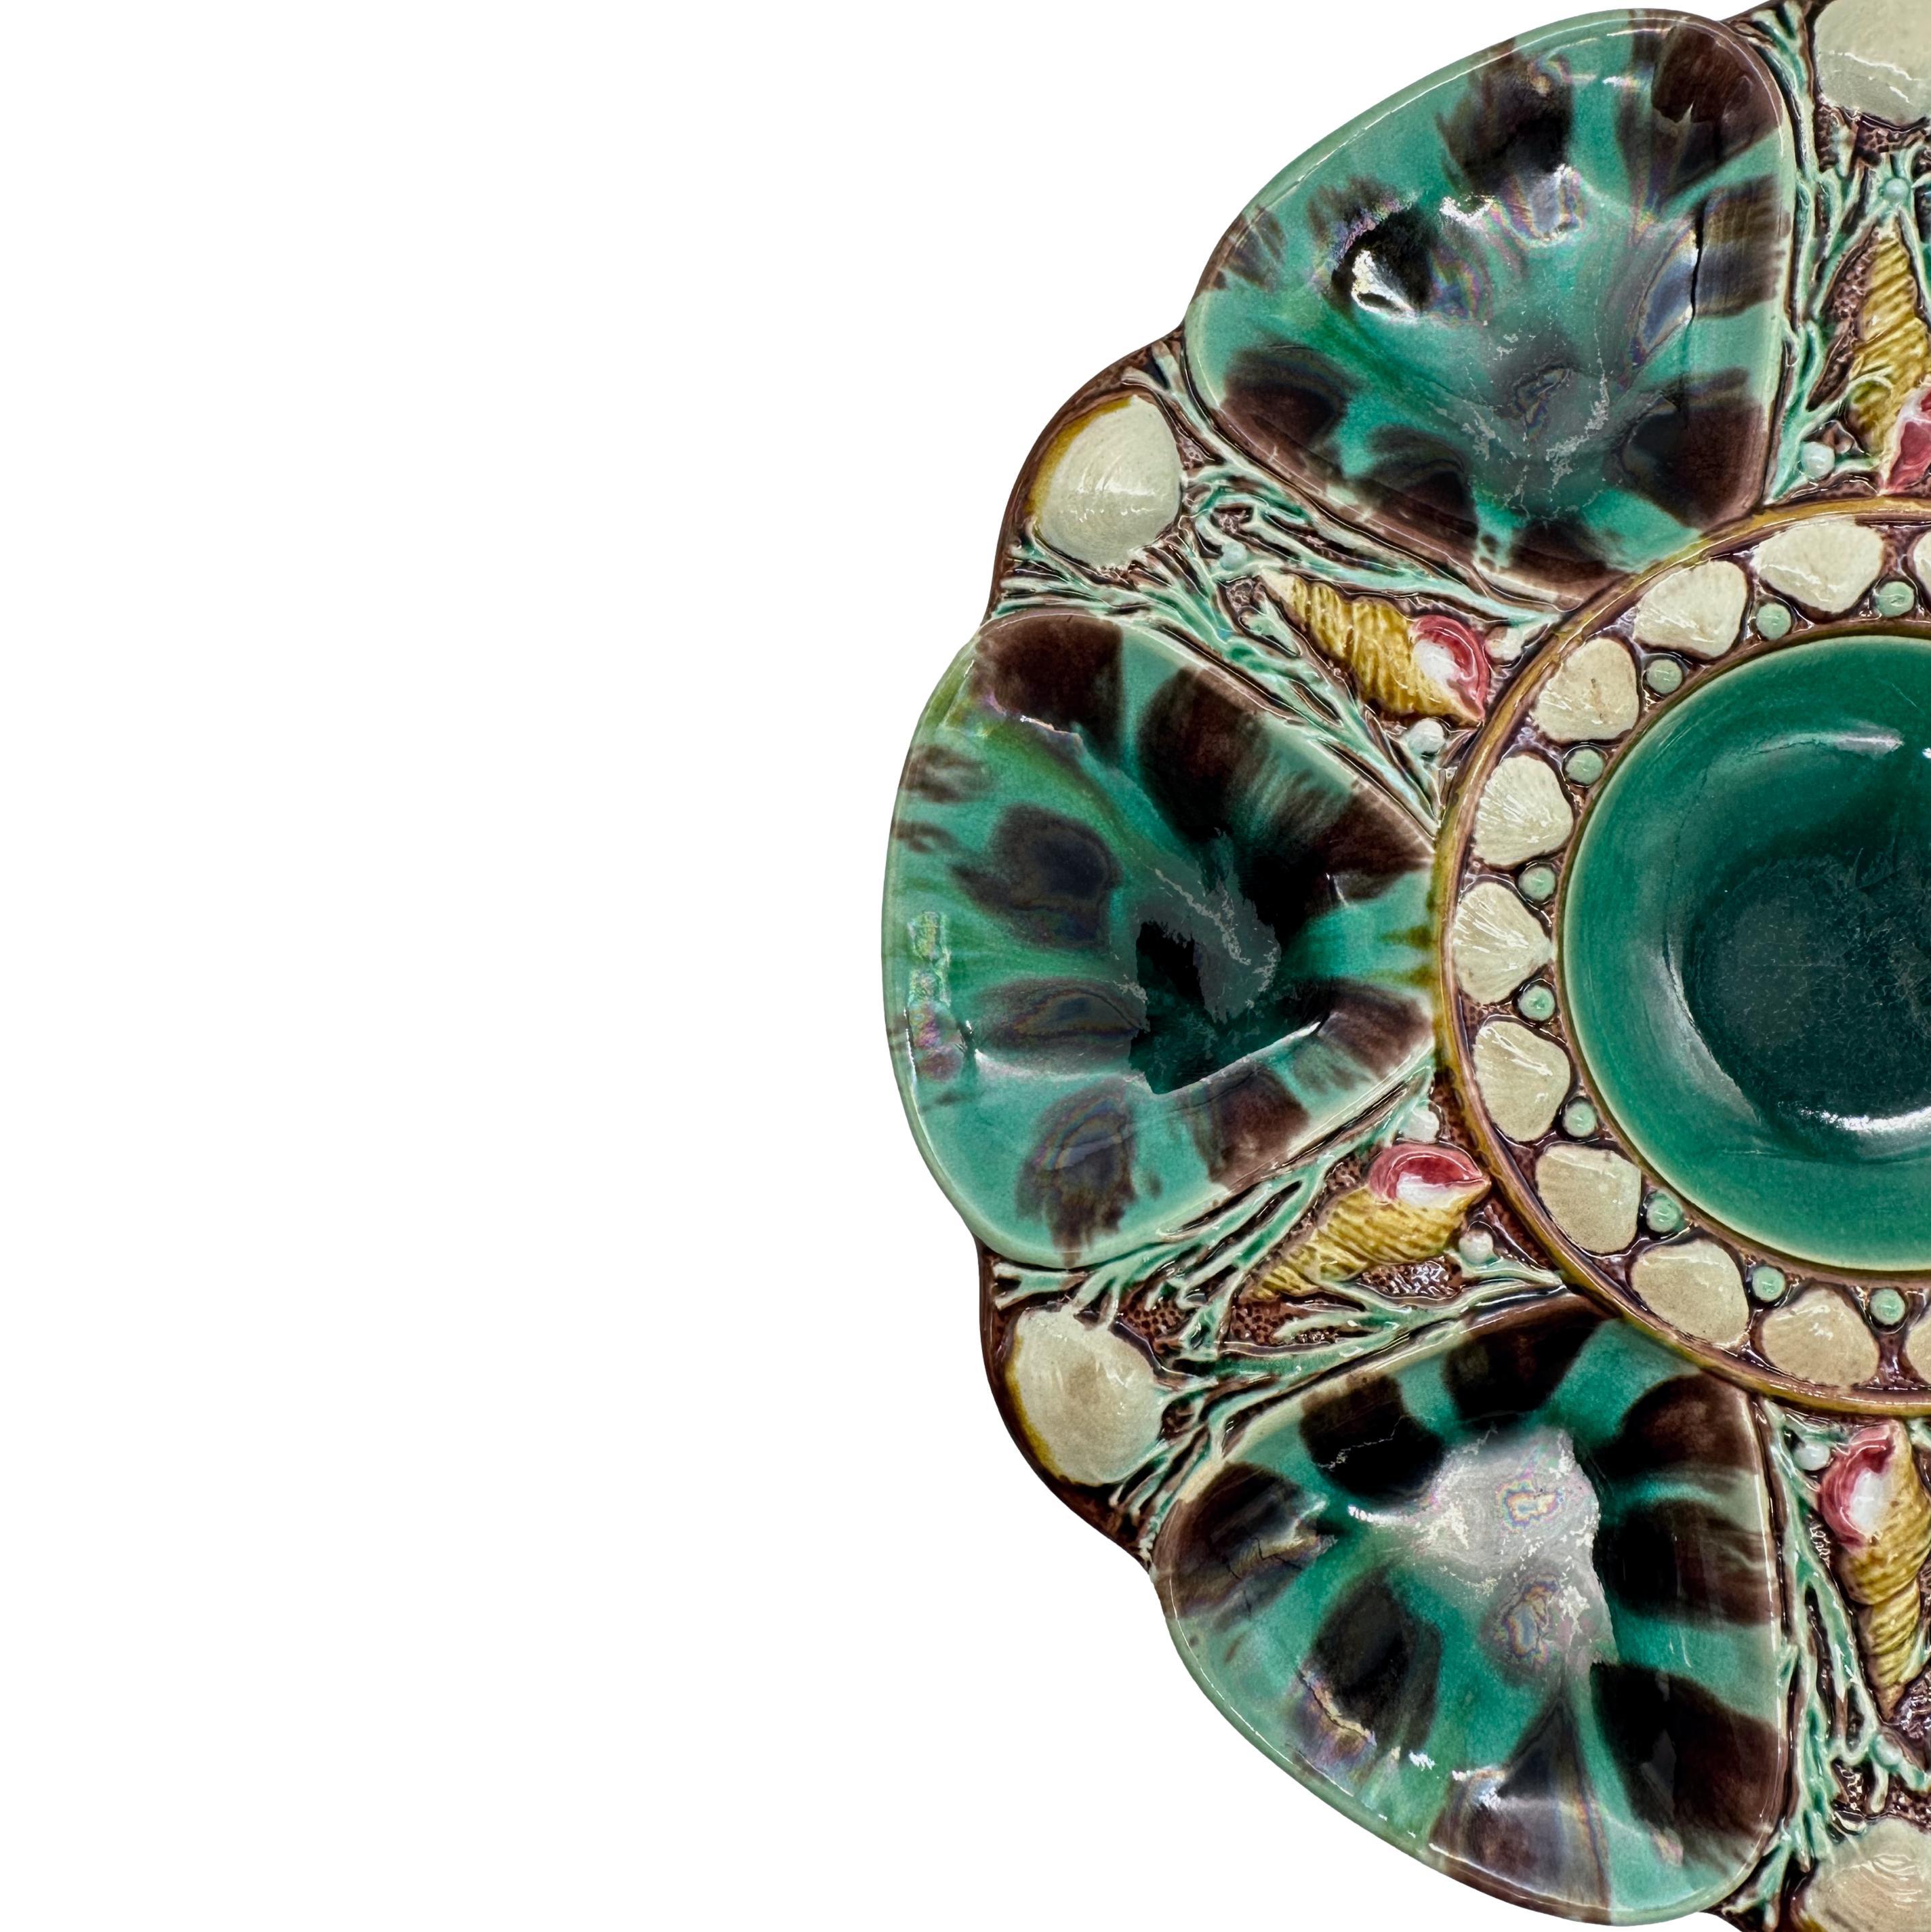 Minton Majolica Oyster Plate, the relief-molded dish with six wells glazed in mottled leopard spots of green and dark brown, each well separated by shells and seaweed, the center well glazed in green and banded with shells, the reverse with